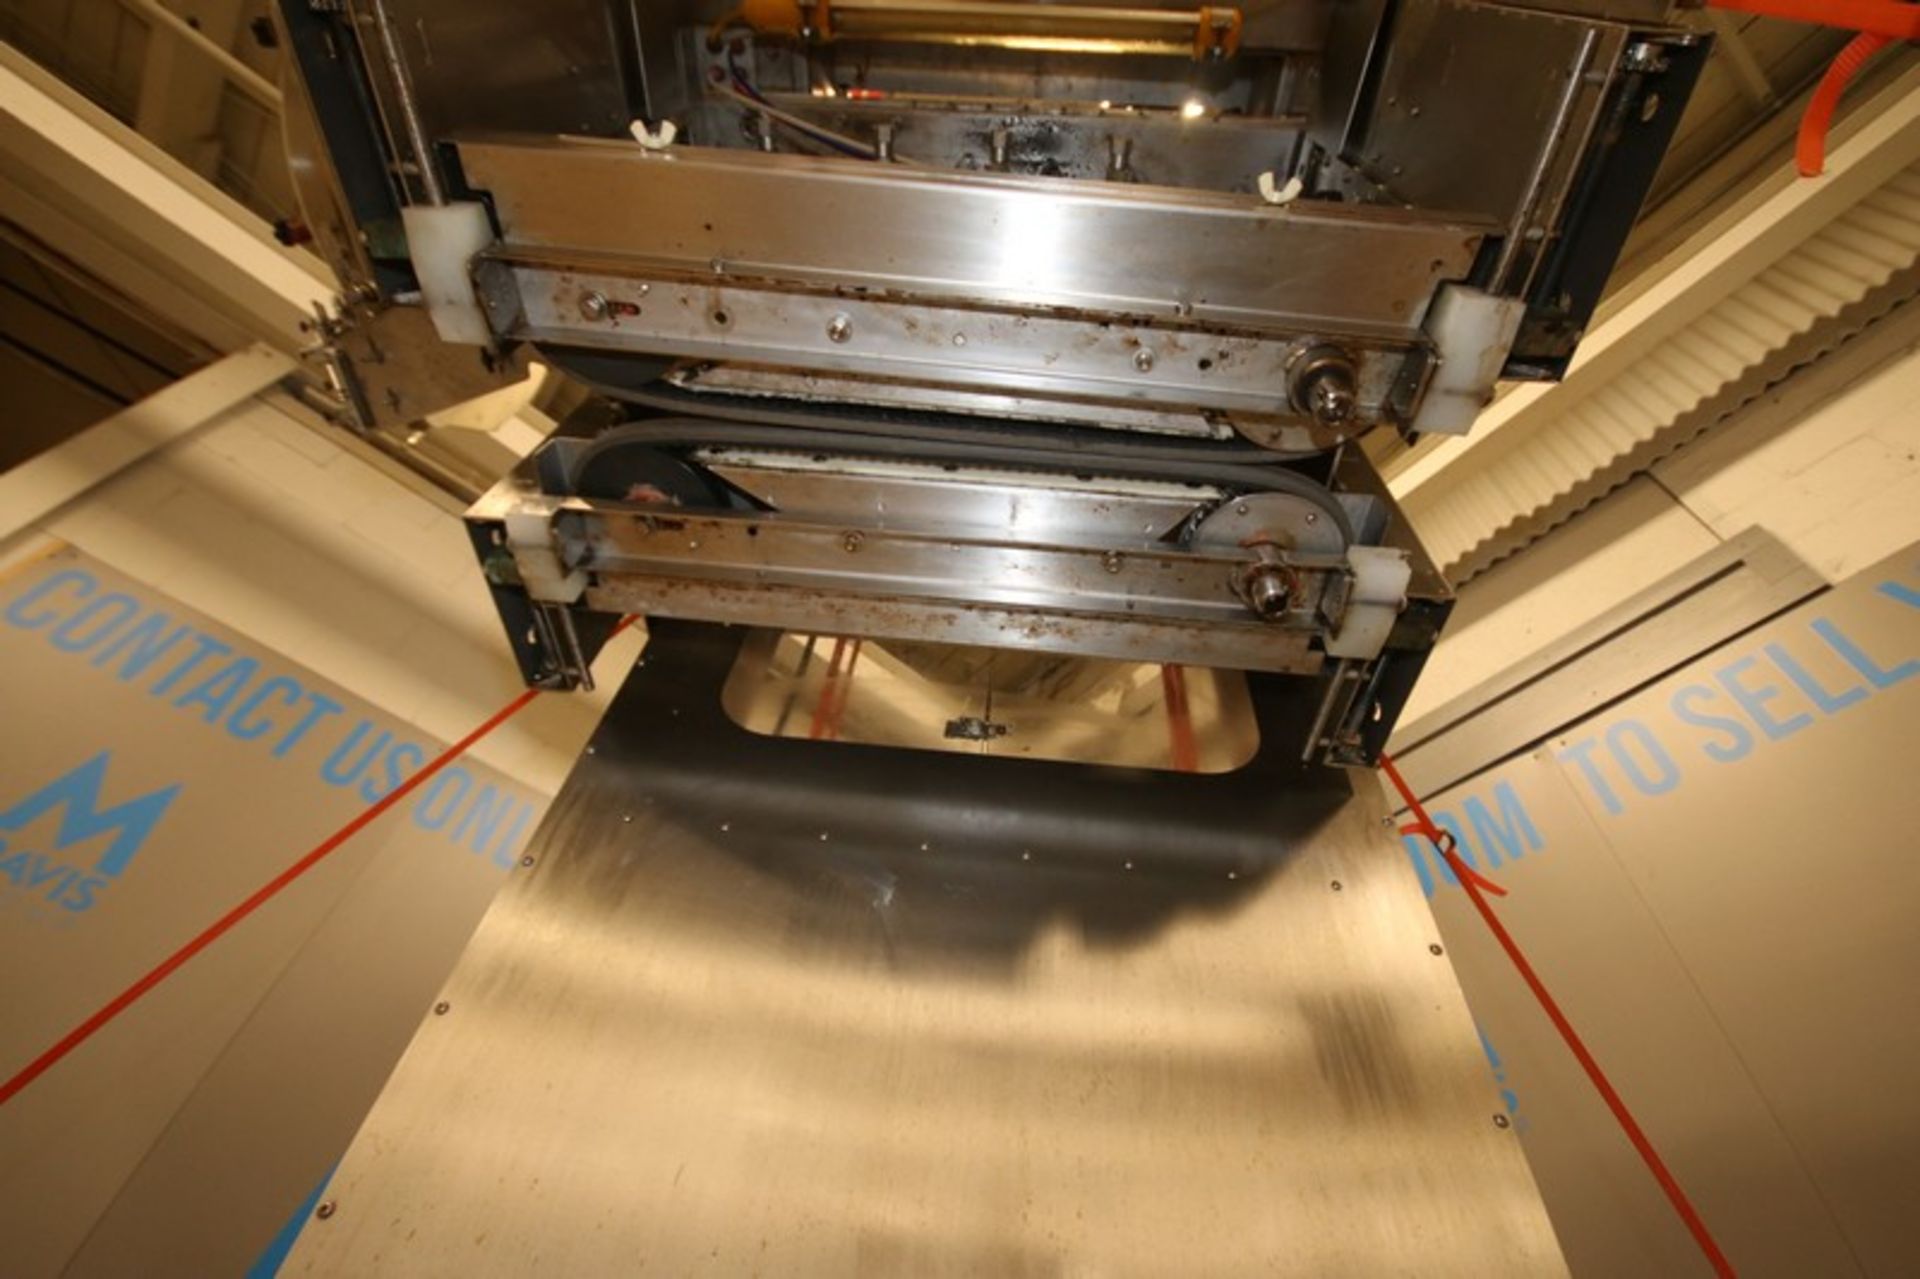 Pack West Precision Packaging Systems 8-Head S/S Inline Capper, Model AUTO 200 CAPPER, SN C-8-A/C- - Image 7 of 11